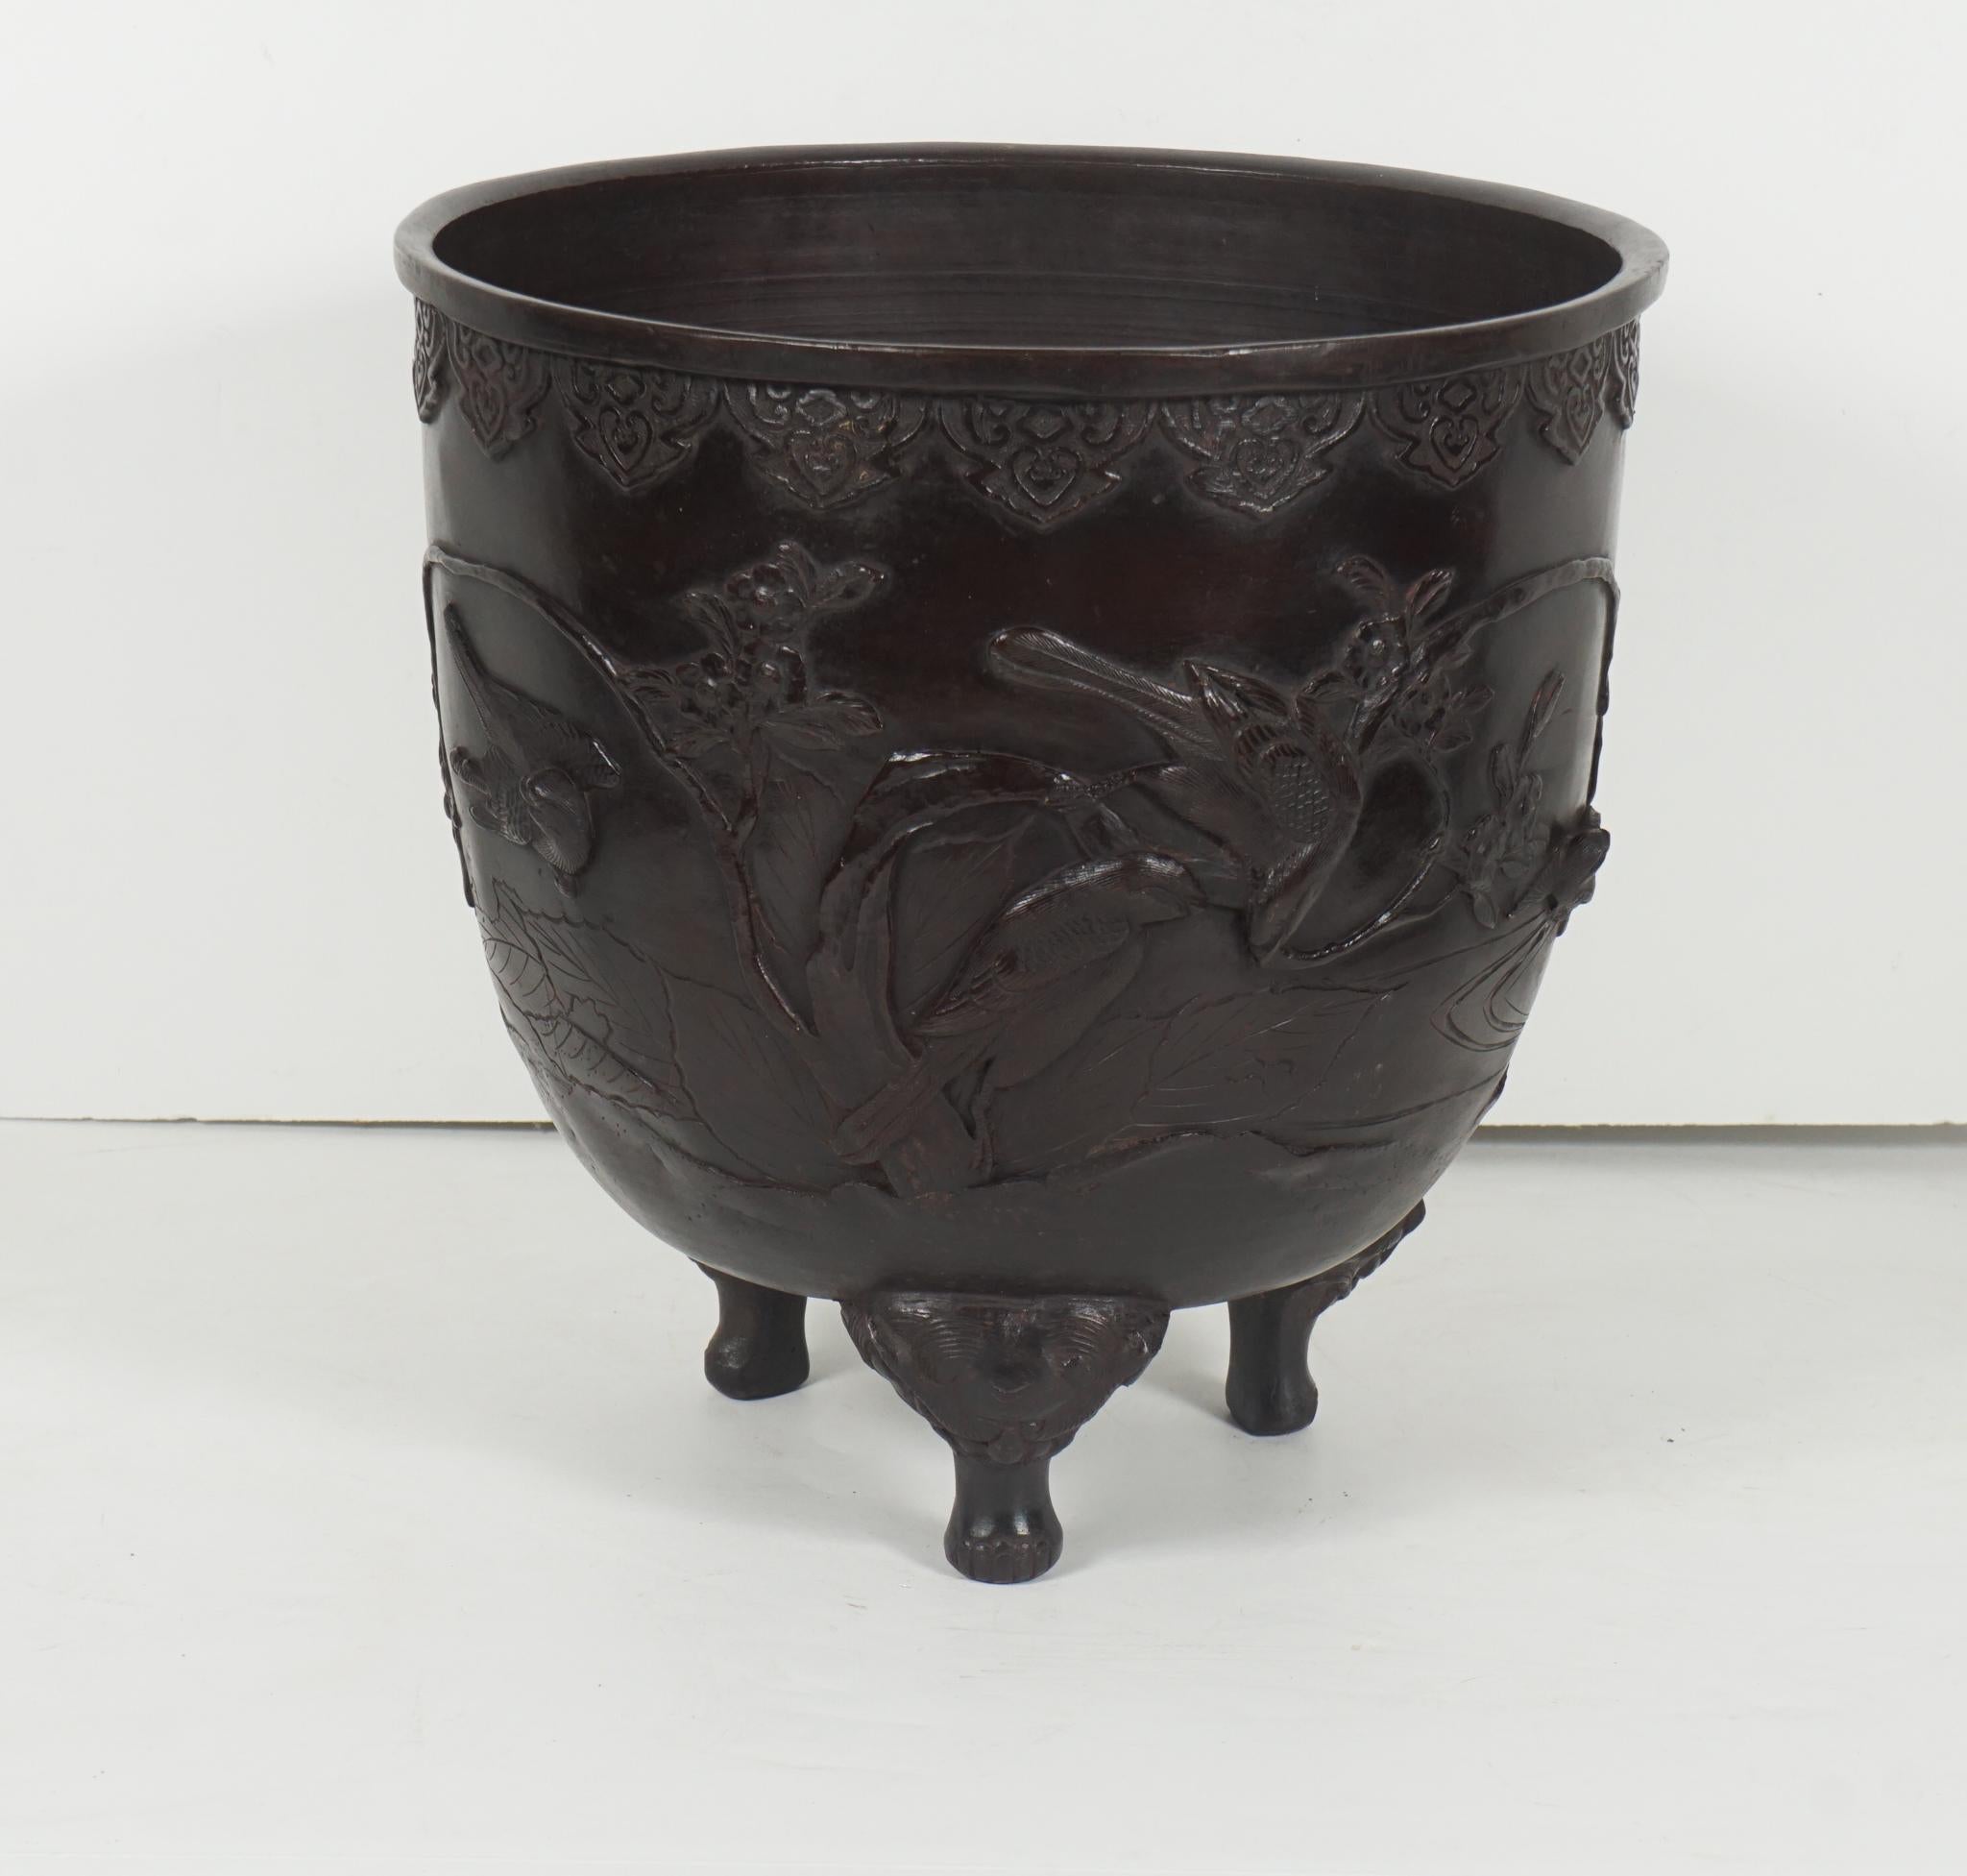 This cast bronze censor is from Japan and was made circa 1880. Raised up on three legs which issue from demons mouths the container is cast with reliefs of sparrows in flight in a foliated and wooded landscape. All cast in fine detail with high and